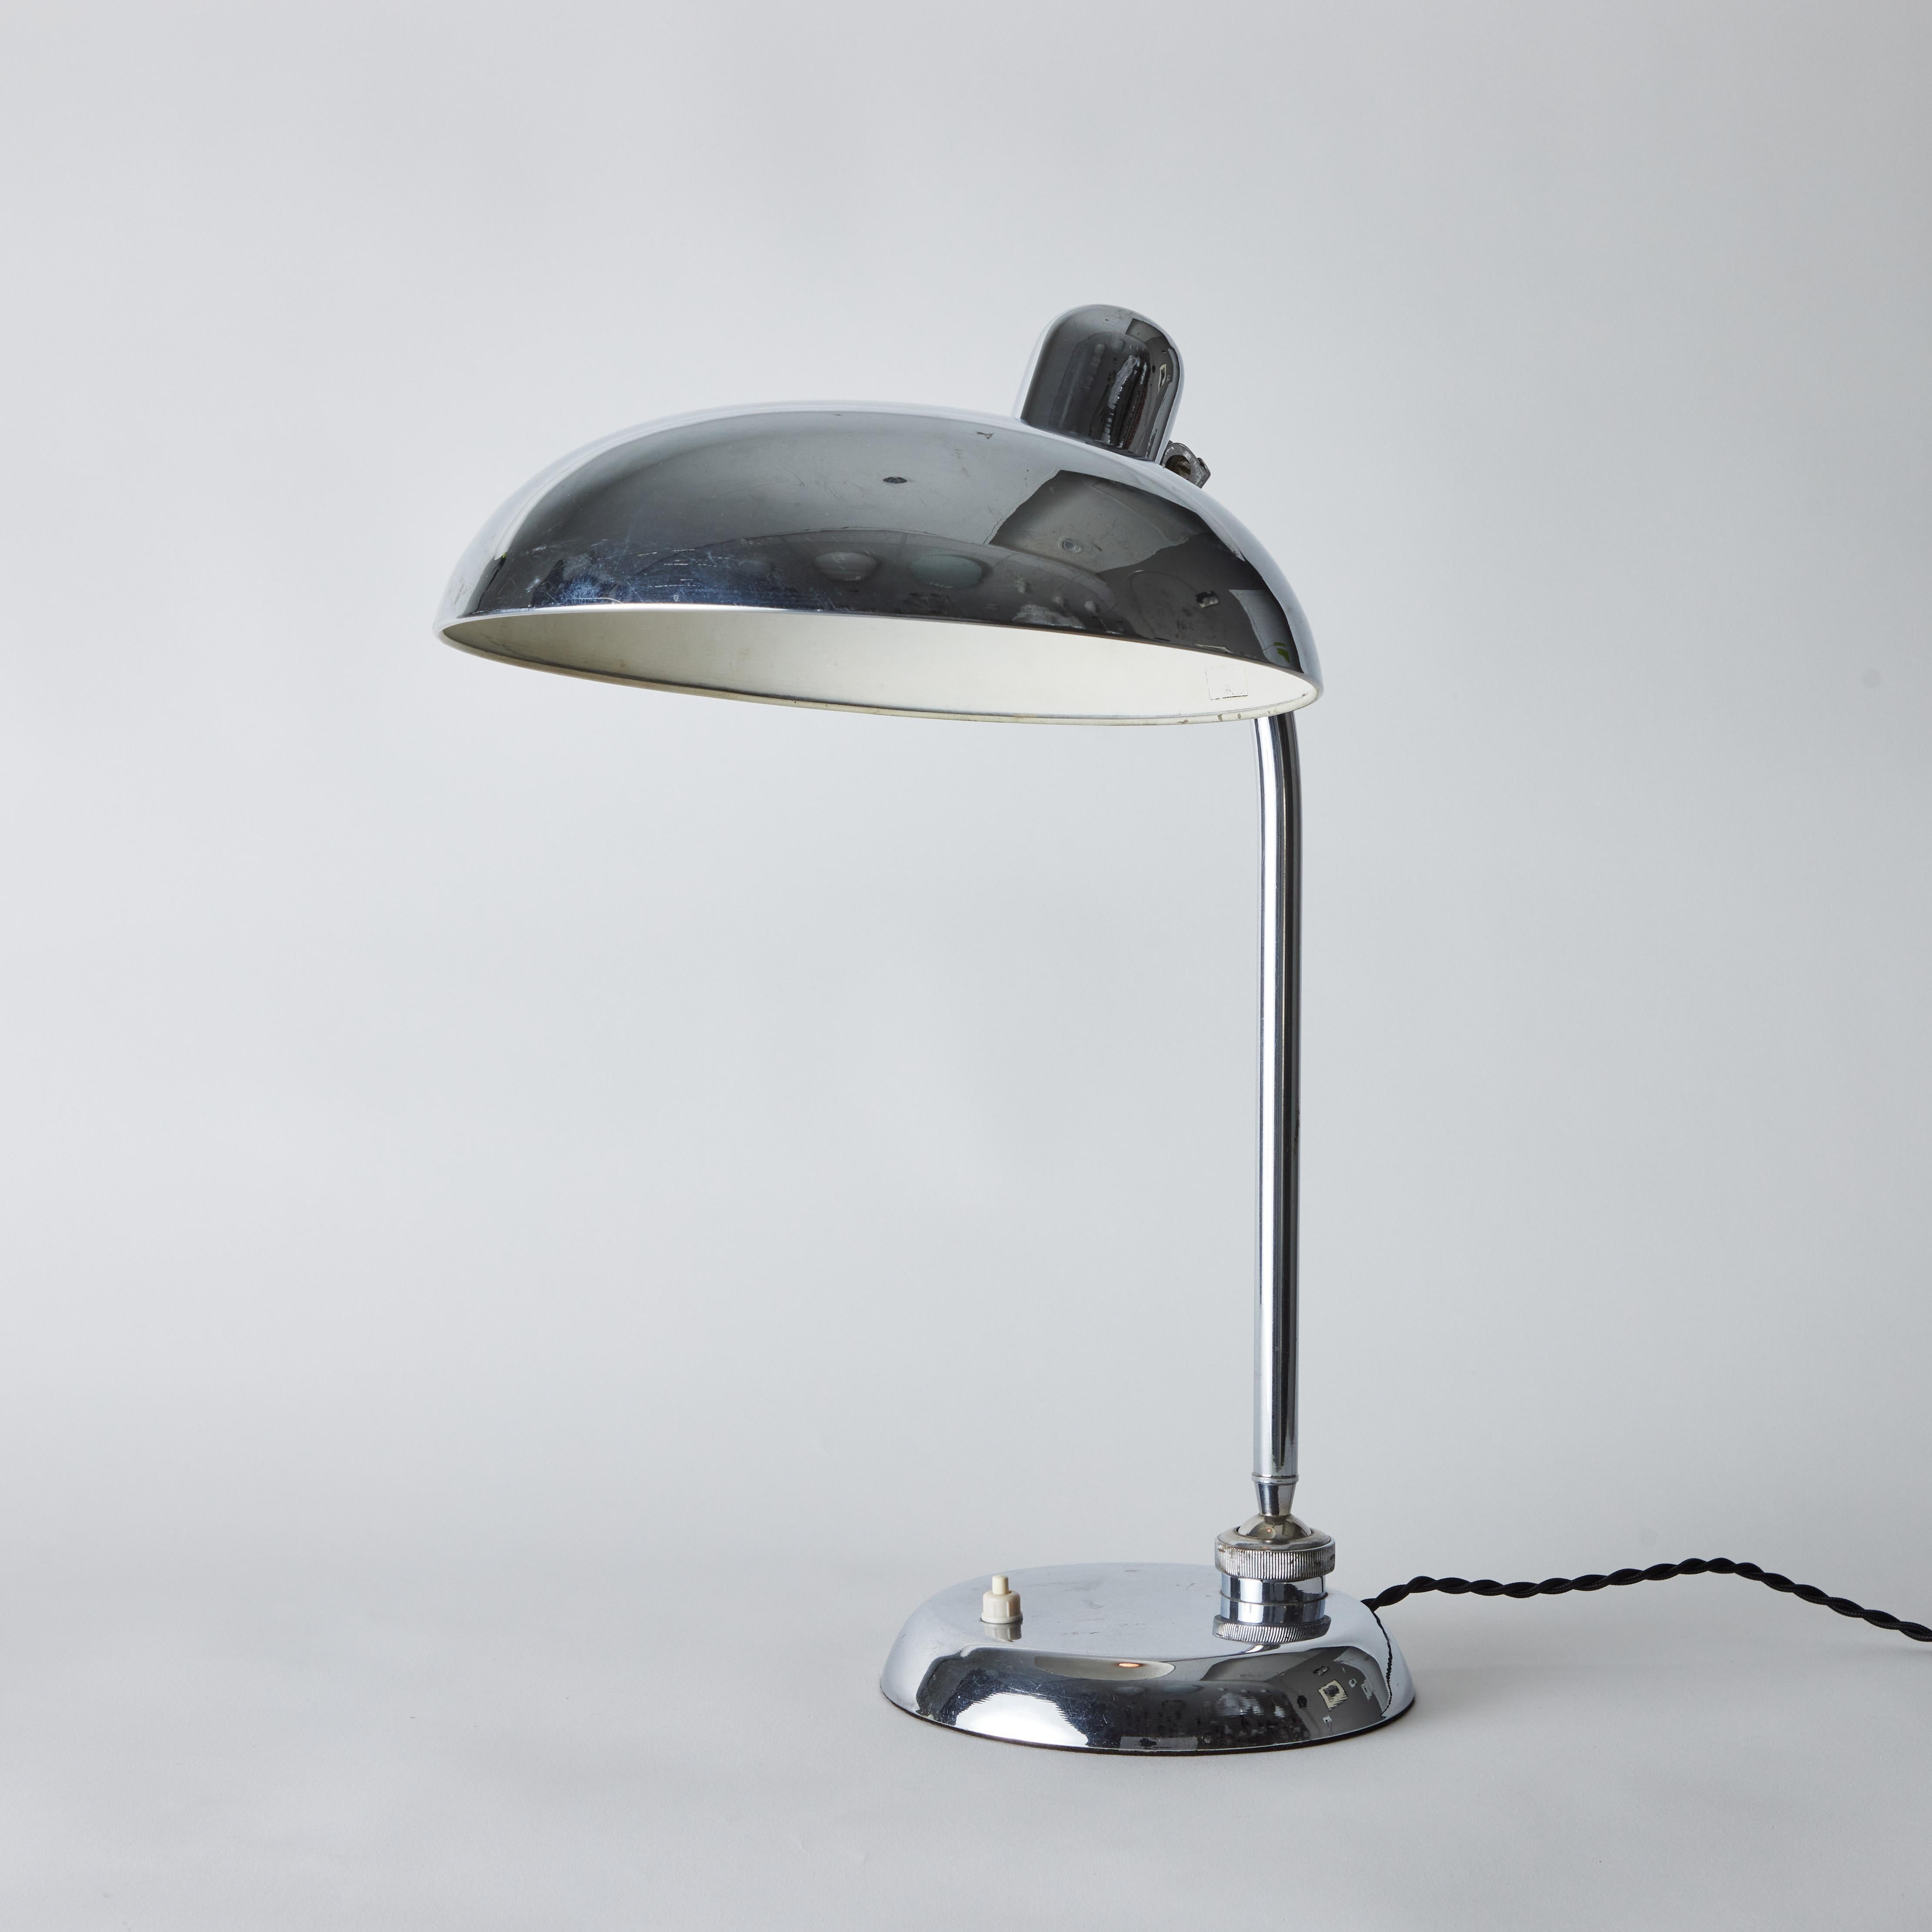 Scandinavian Modern Large 1940s Giovanni Michelucci Chrome Ministerial Table Lamp for Lariolux For Sale